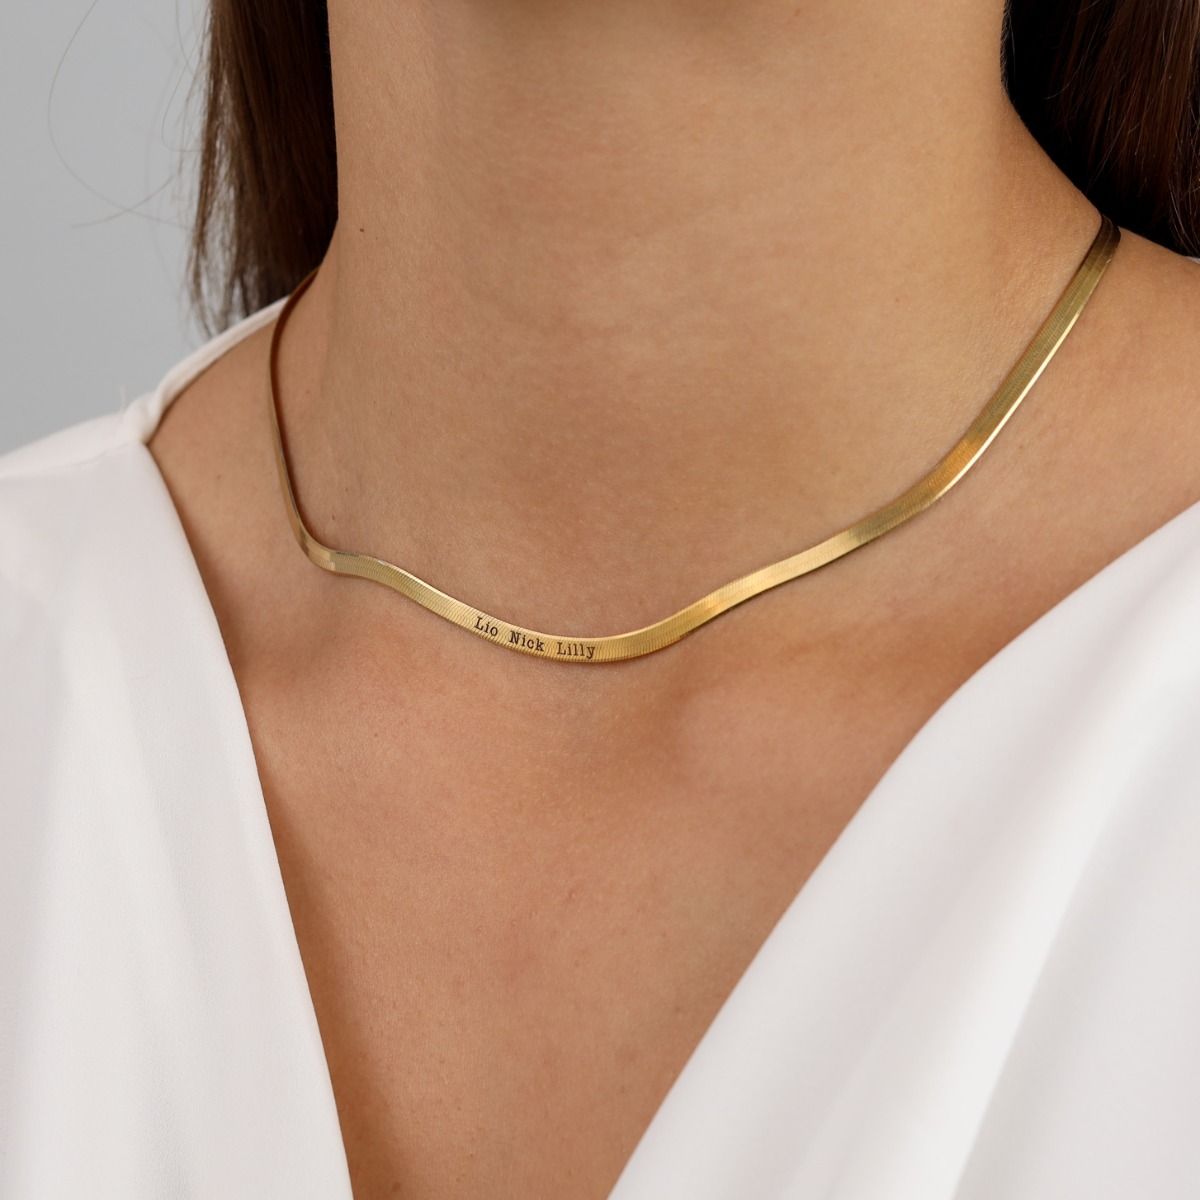 Herringbone Gold Plated Engraved Necklace for Women - Talisa